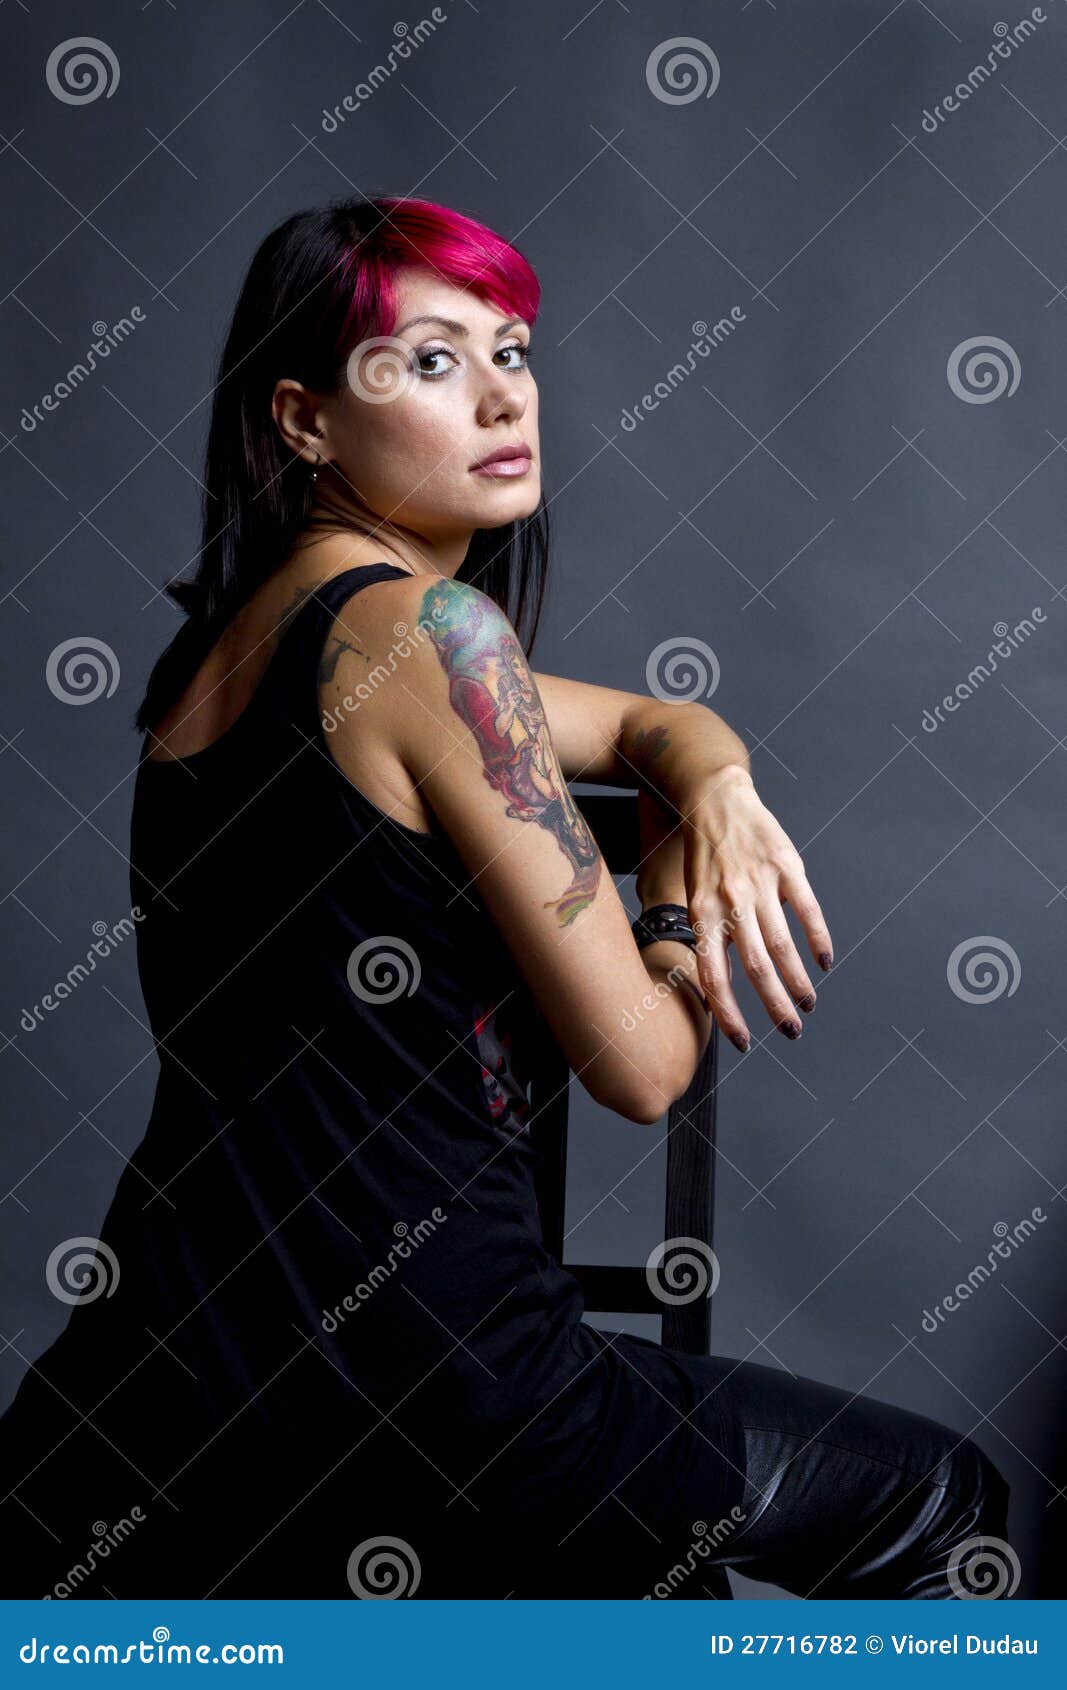 Rebel woman stock photo. Image of looking, staring, adult 